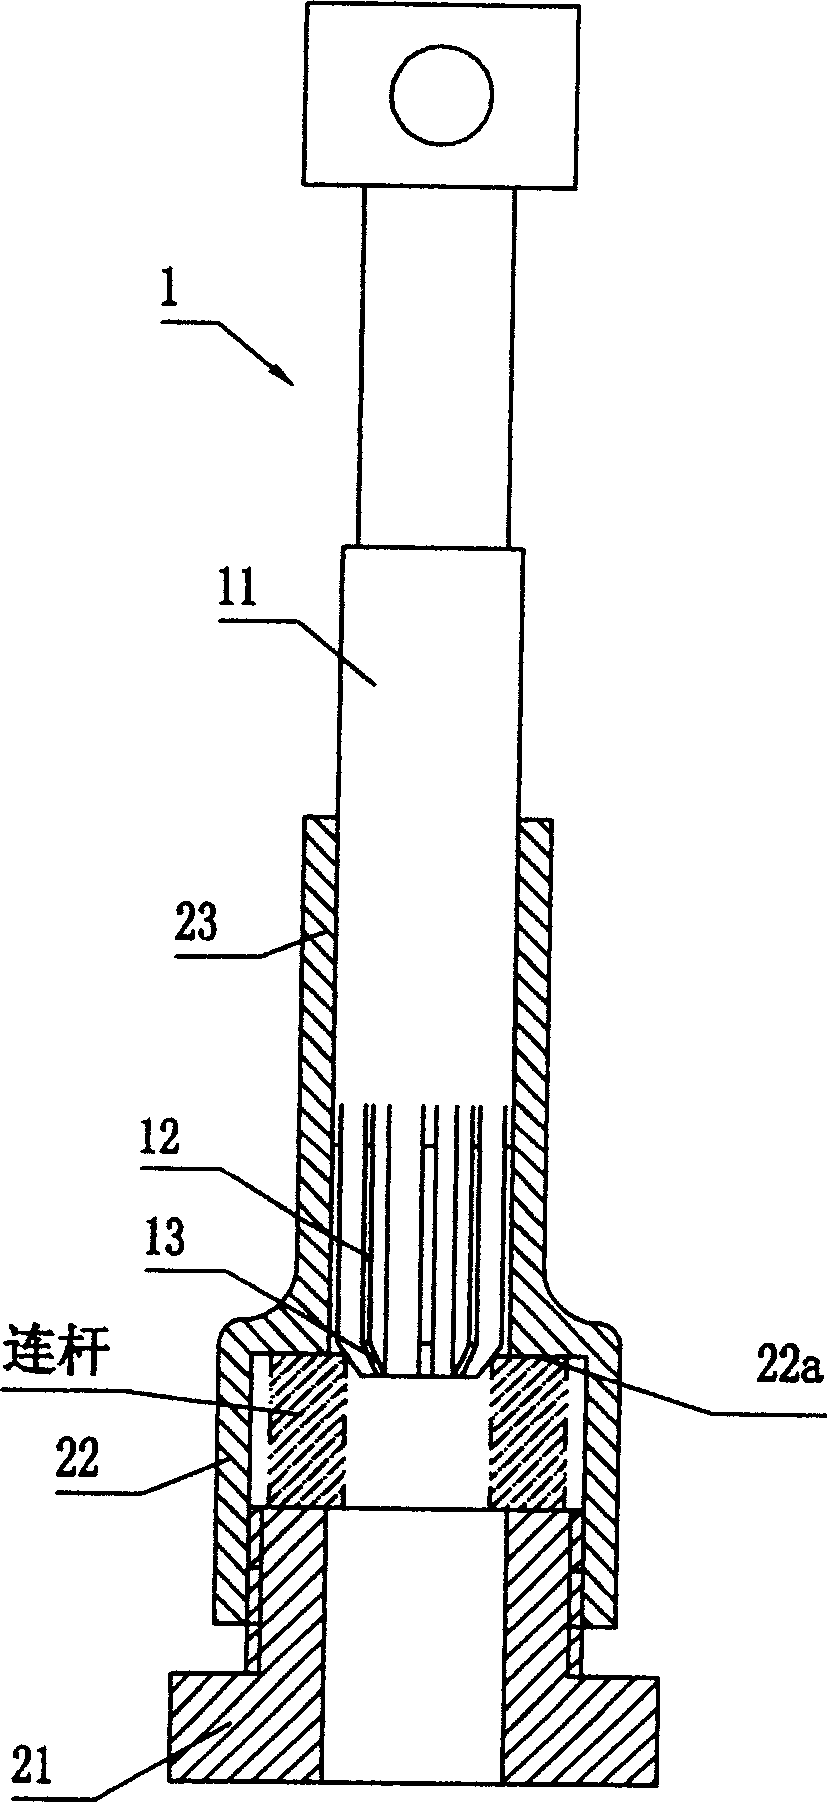 Dedicated clamp for reaming sheath of connecting rod of engine